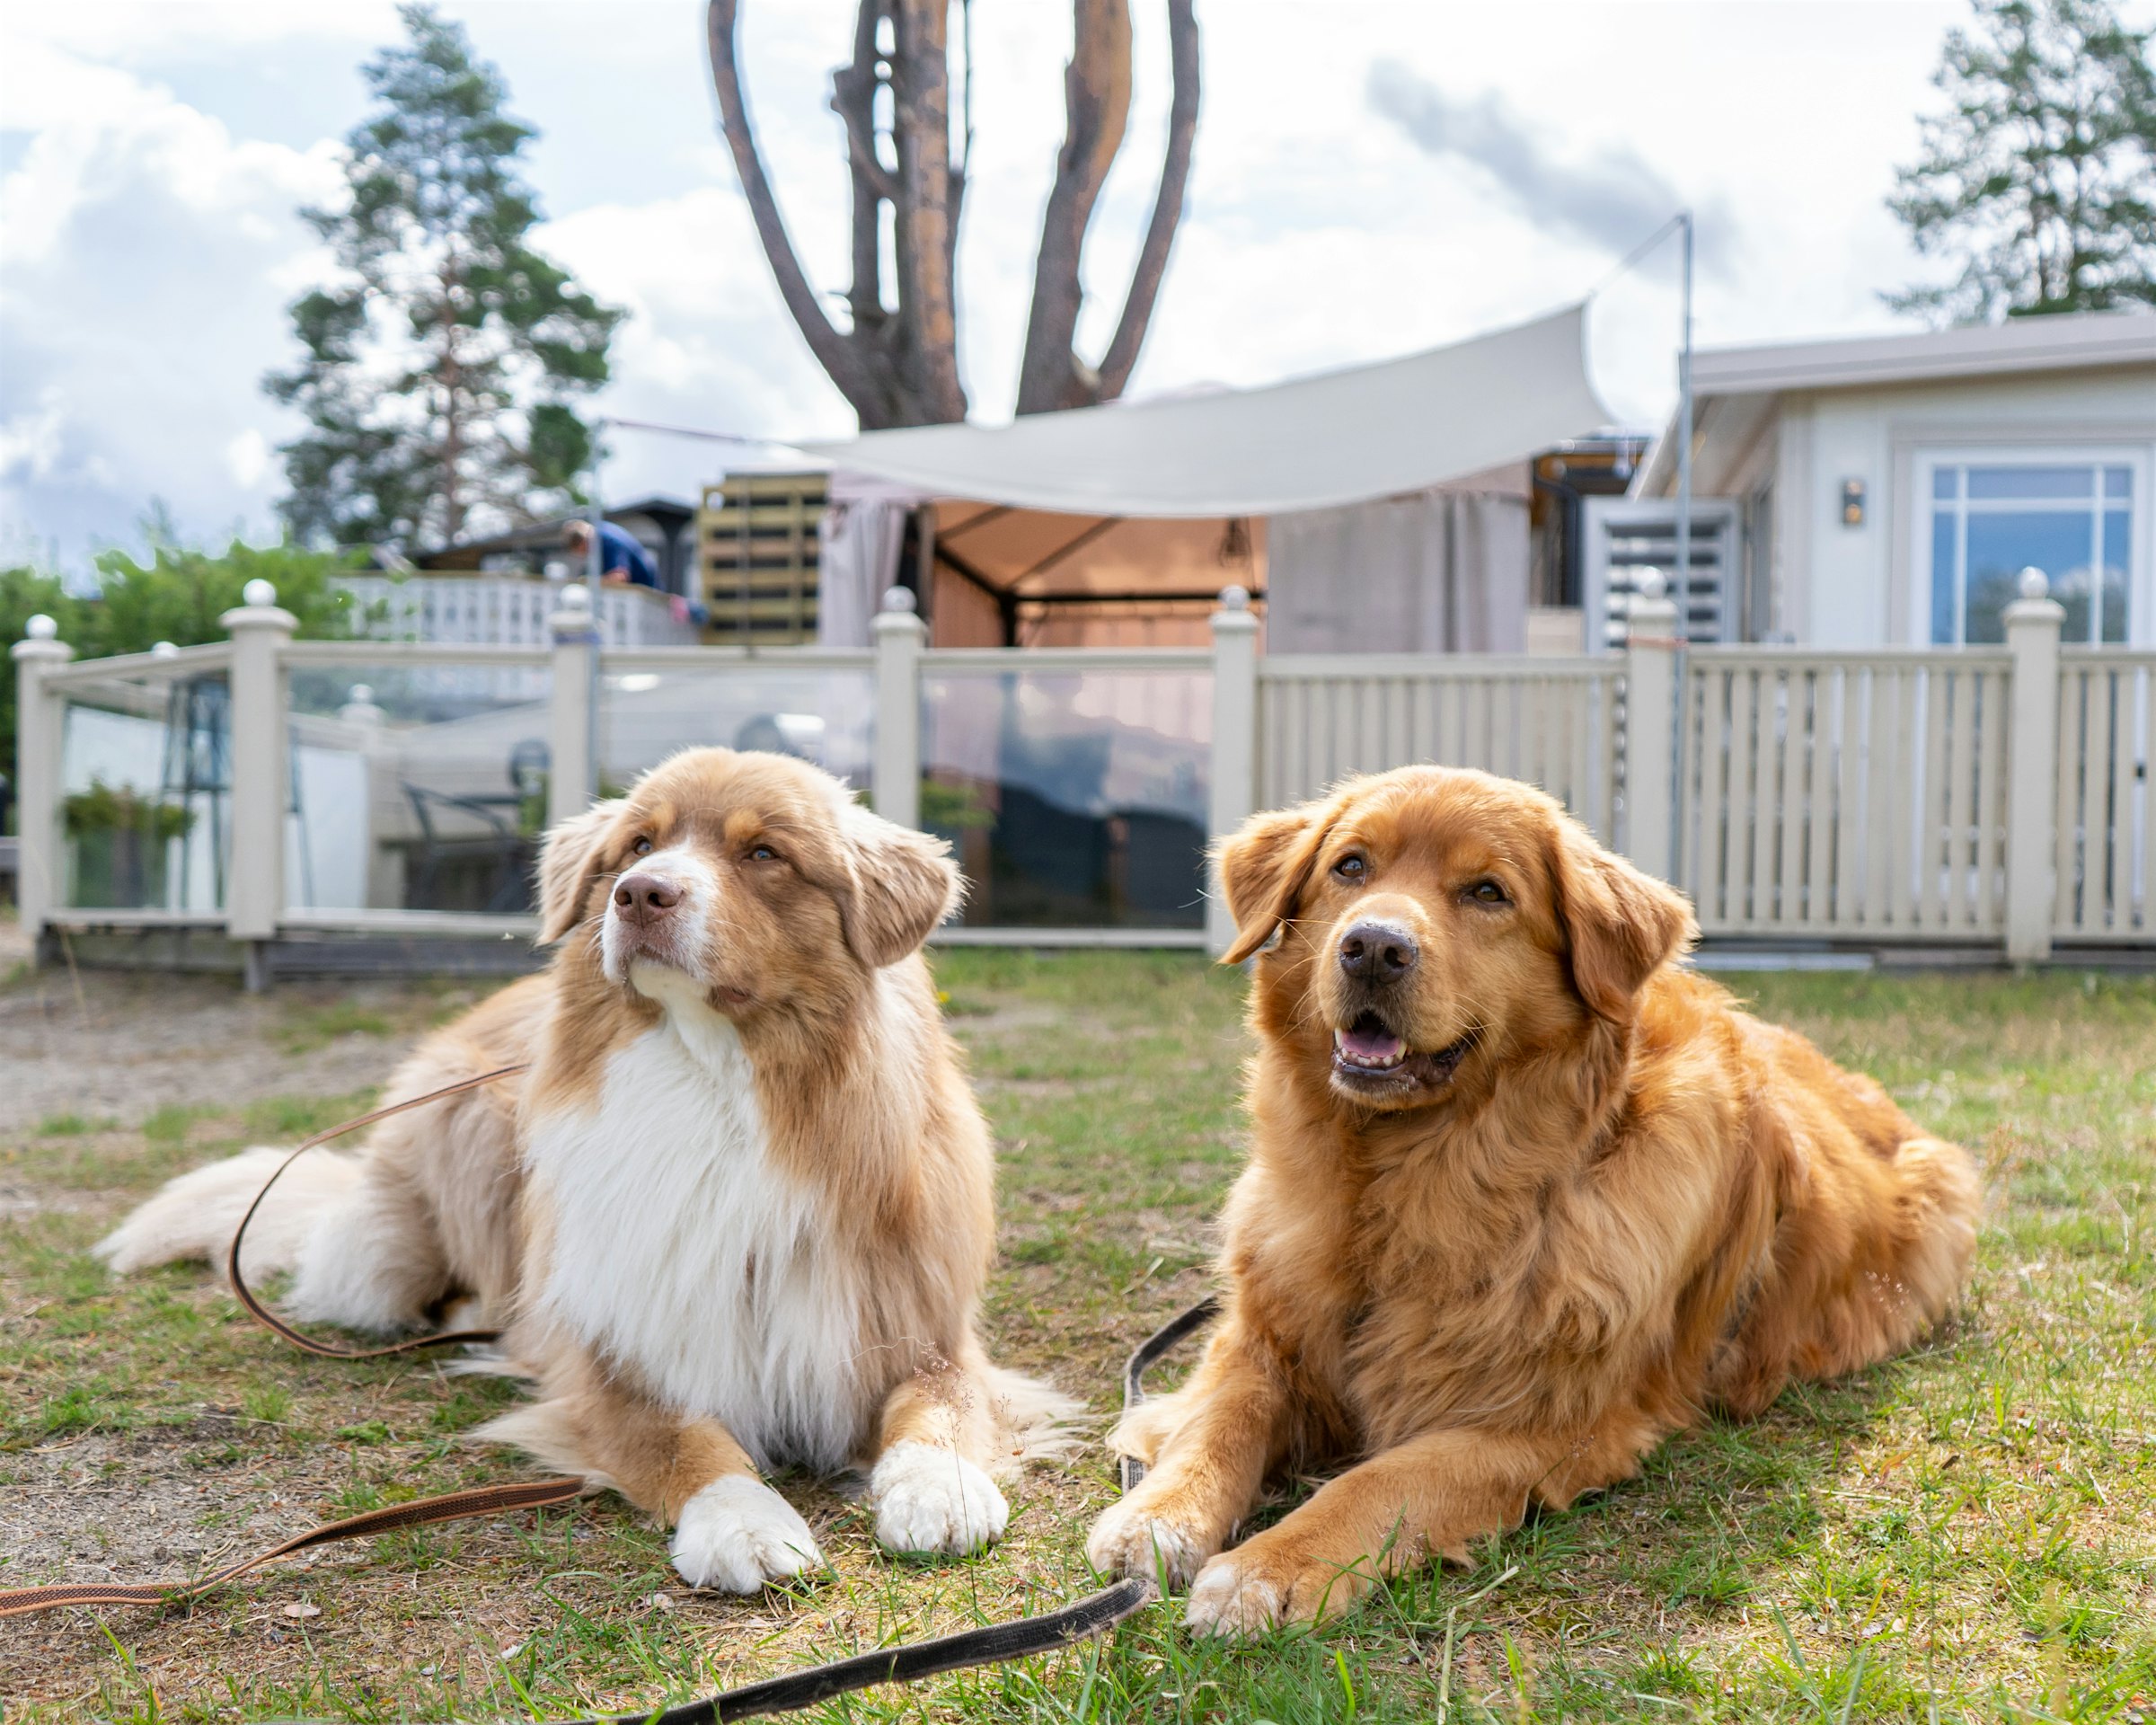 Two dogs lie on the grass in front of a fixed pitch at the campsite. Photo